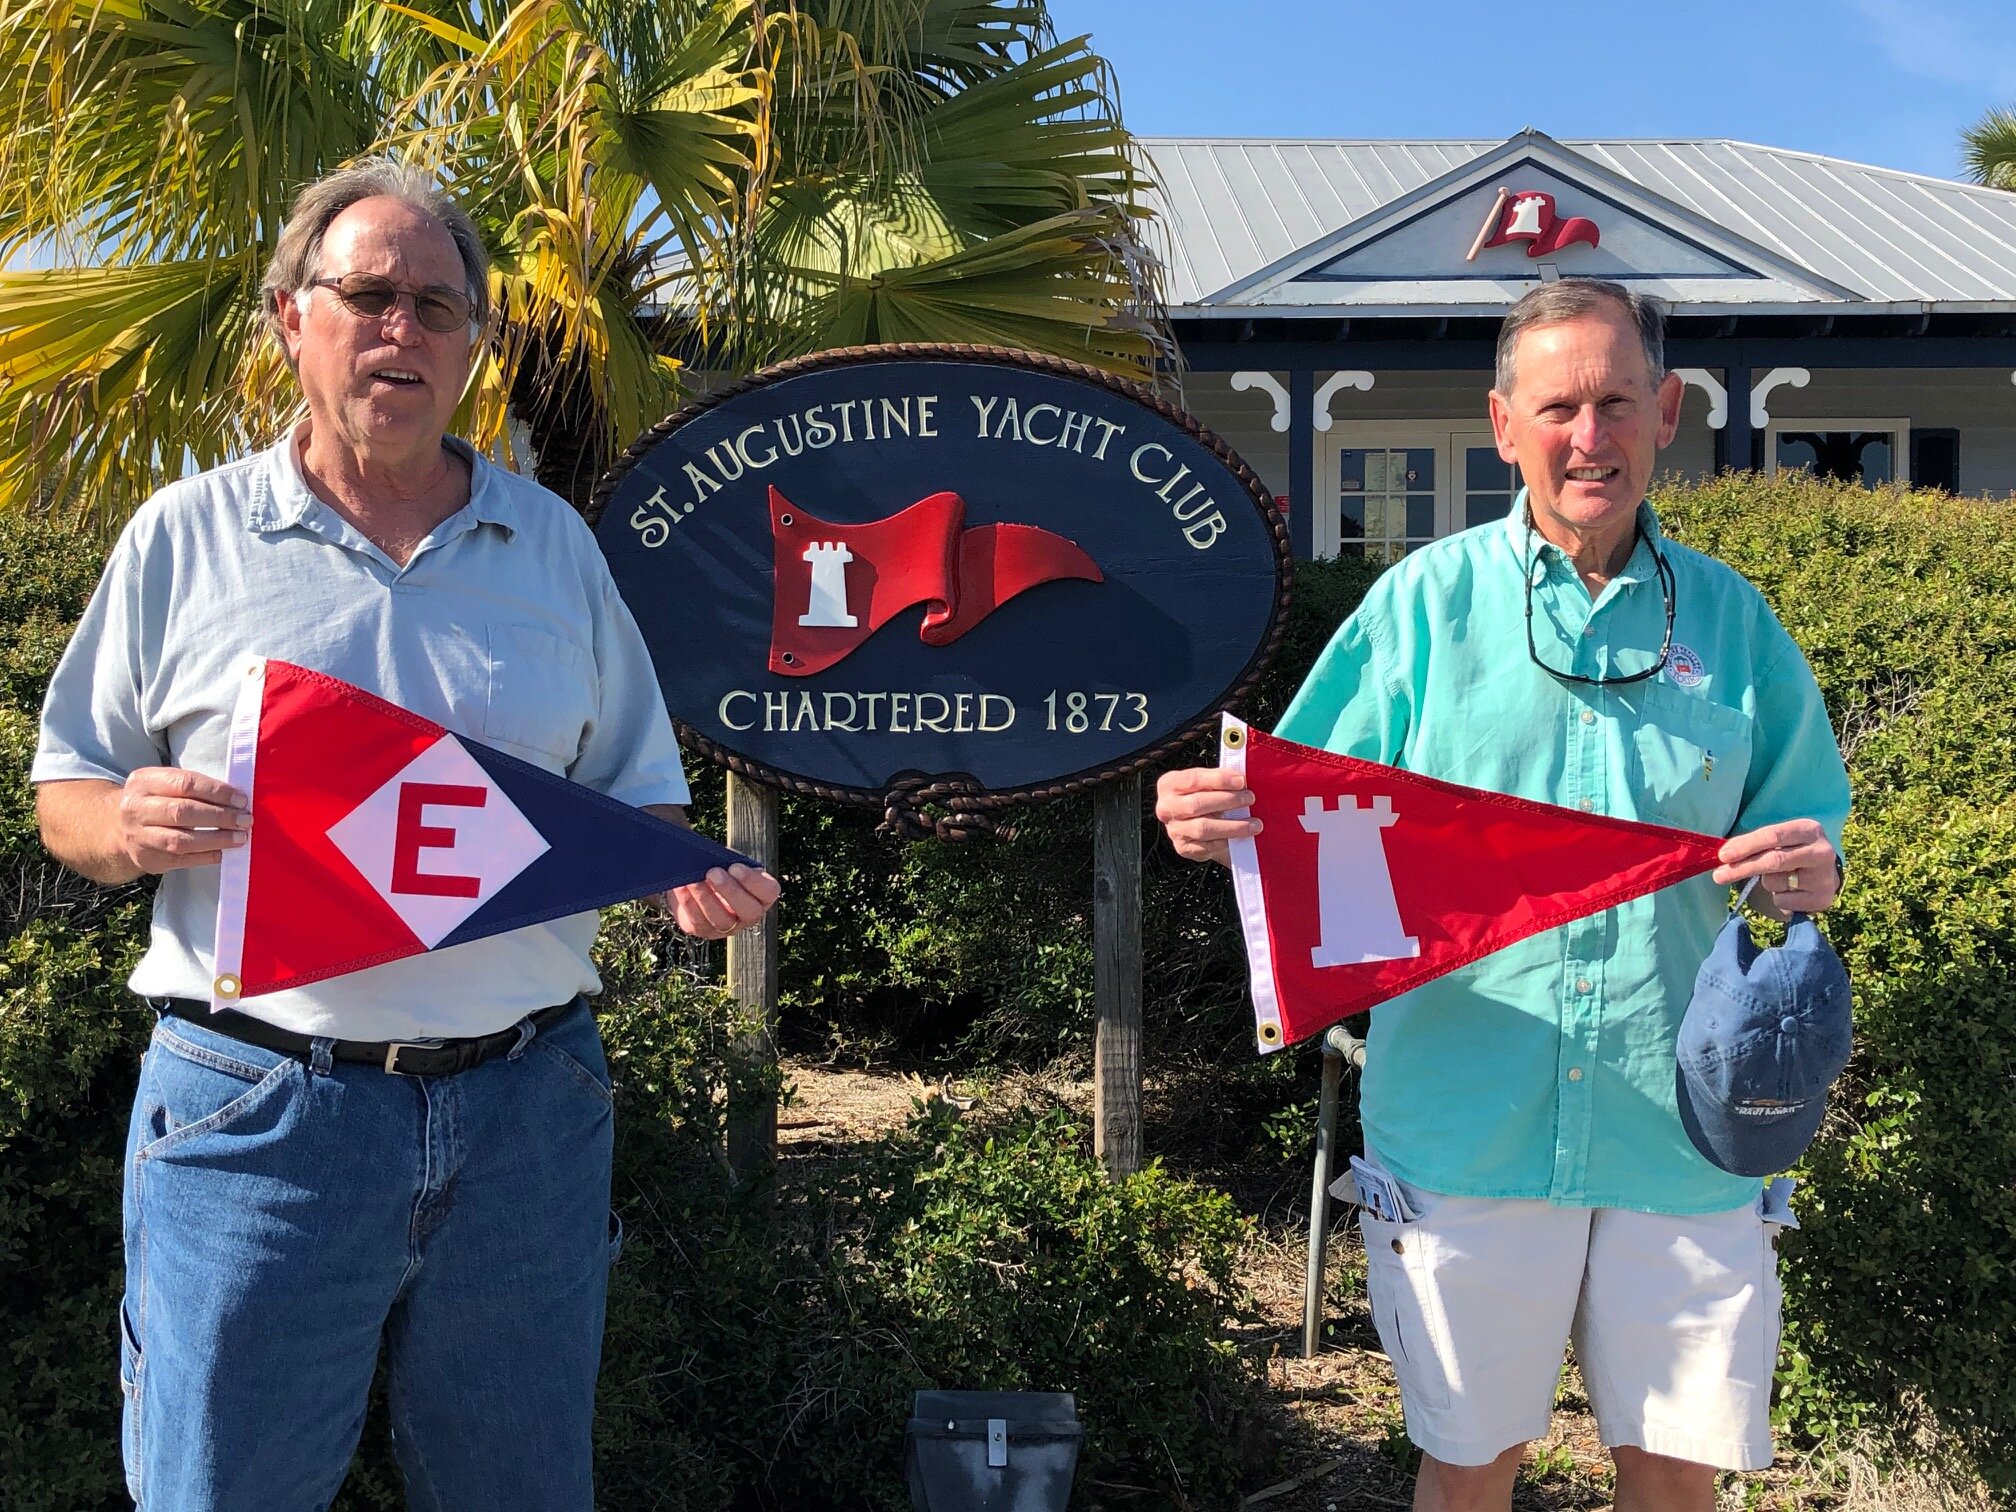  Gary exchanges burgees with the commodore of the St. Augustine Yacht Club in Florida 